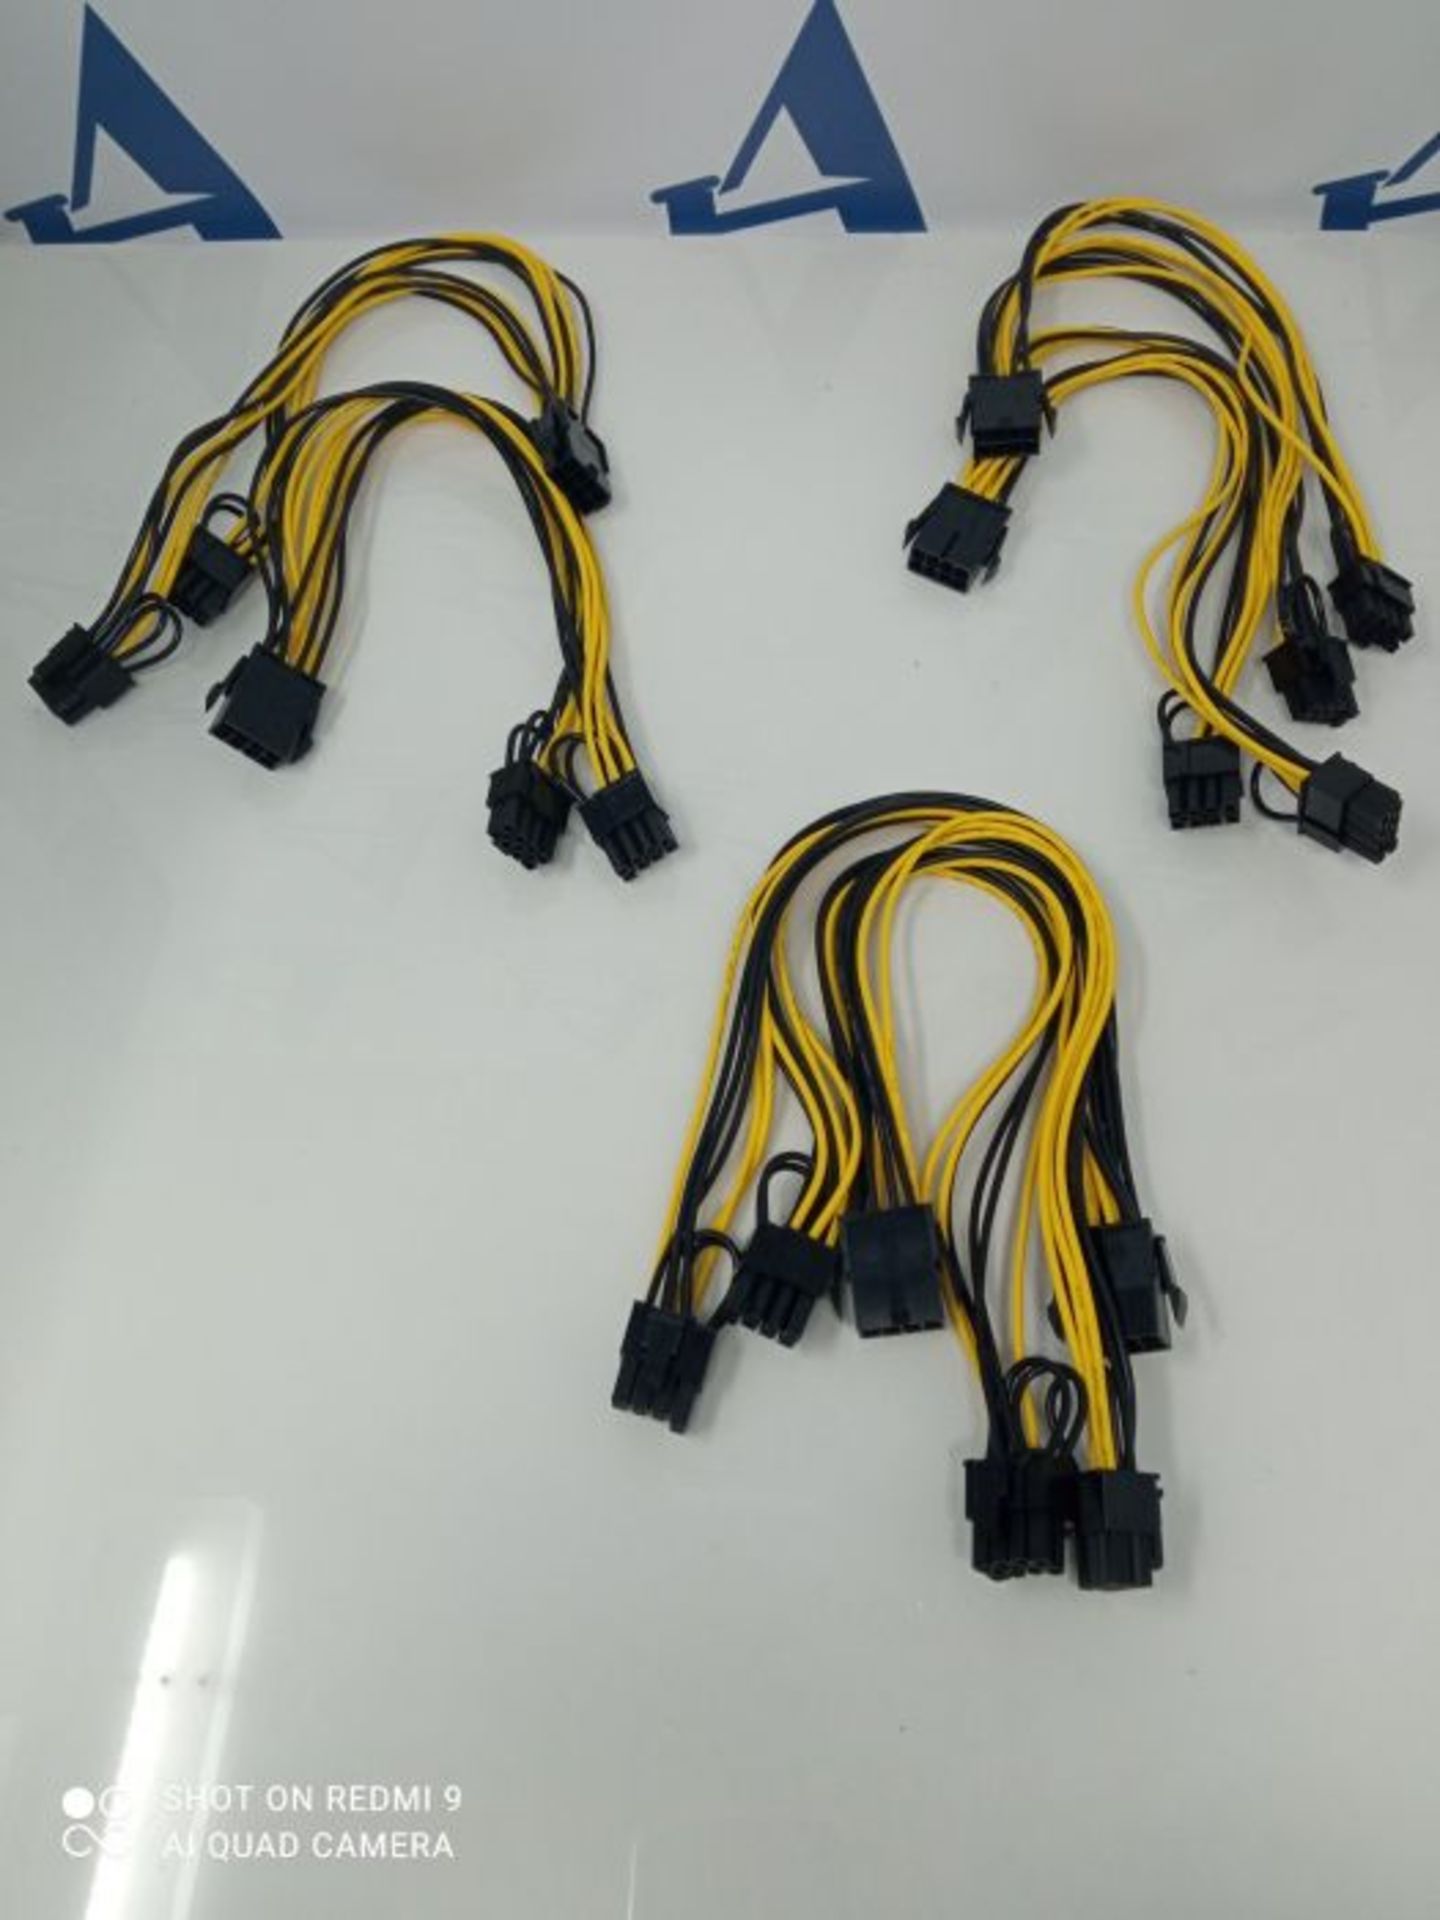 Ziyituod PCIe Splitter,12.5in/32cm 8pin vers Double PCIe 8pin (6 + 2) Carte Graphique - Image 2 of 2